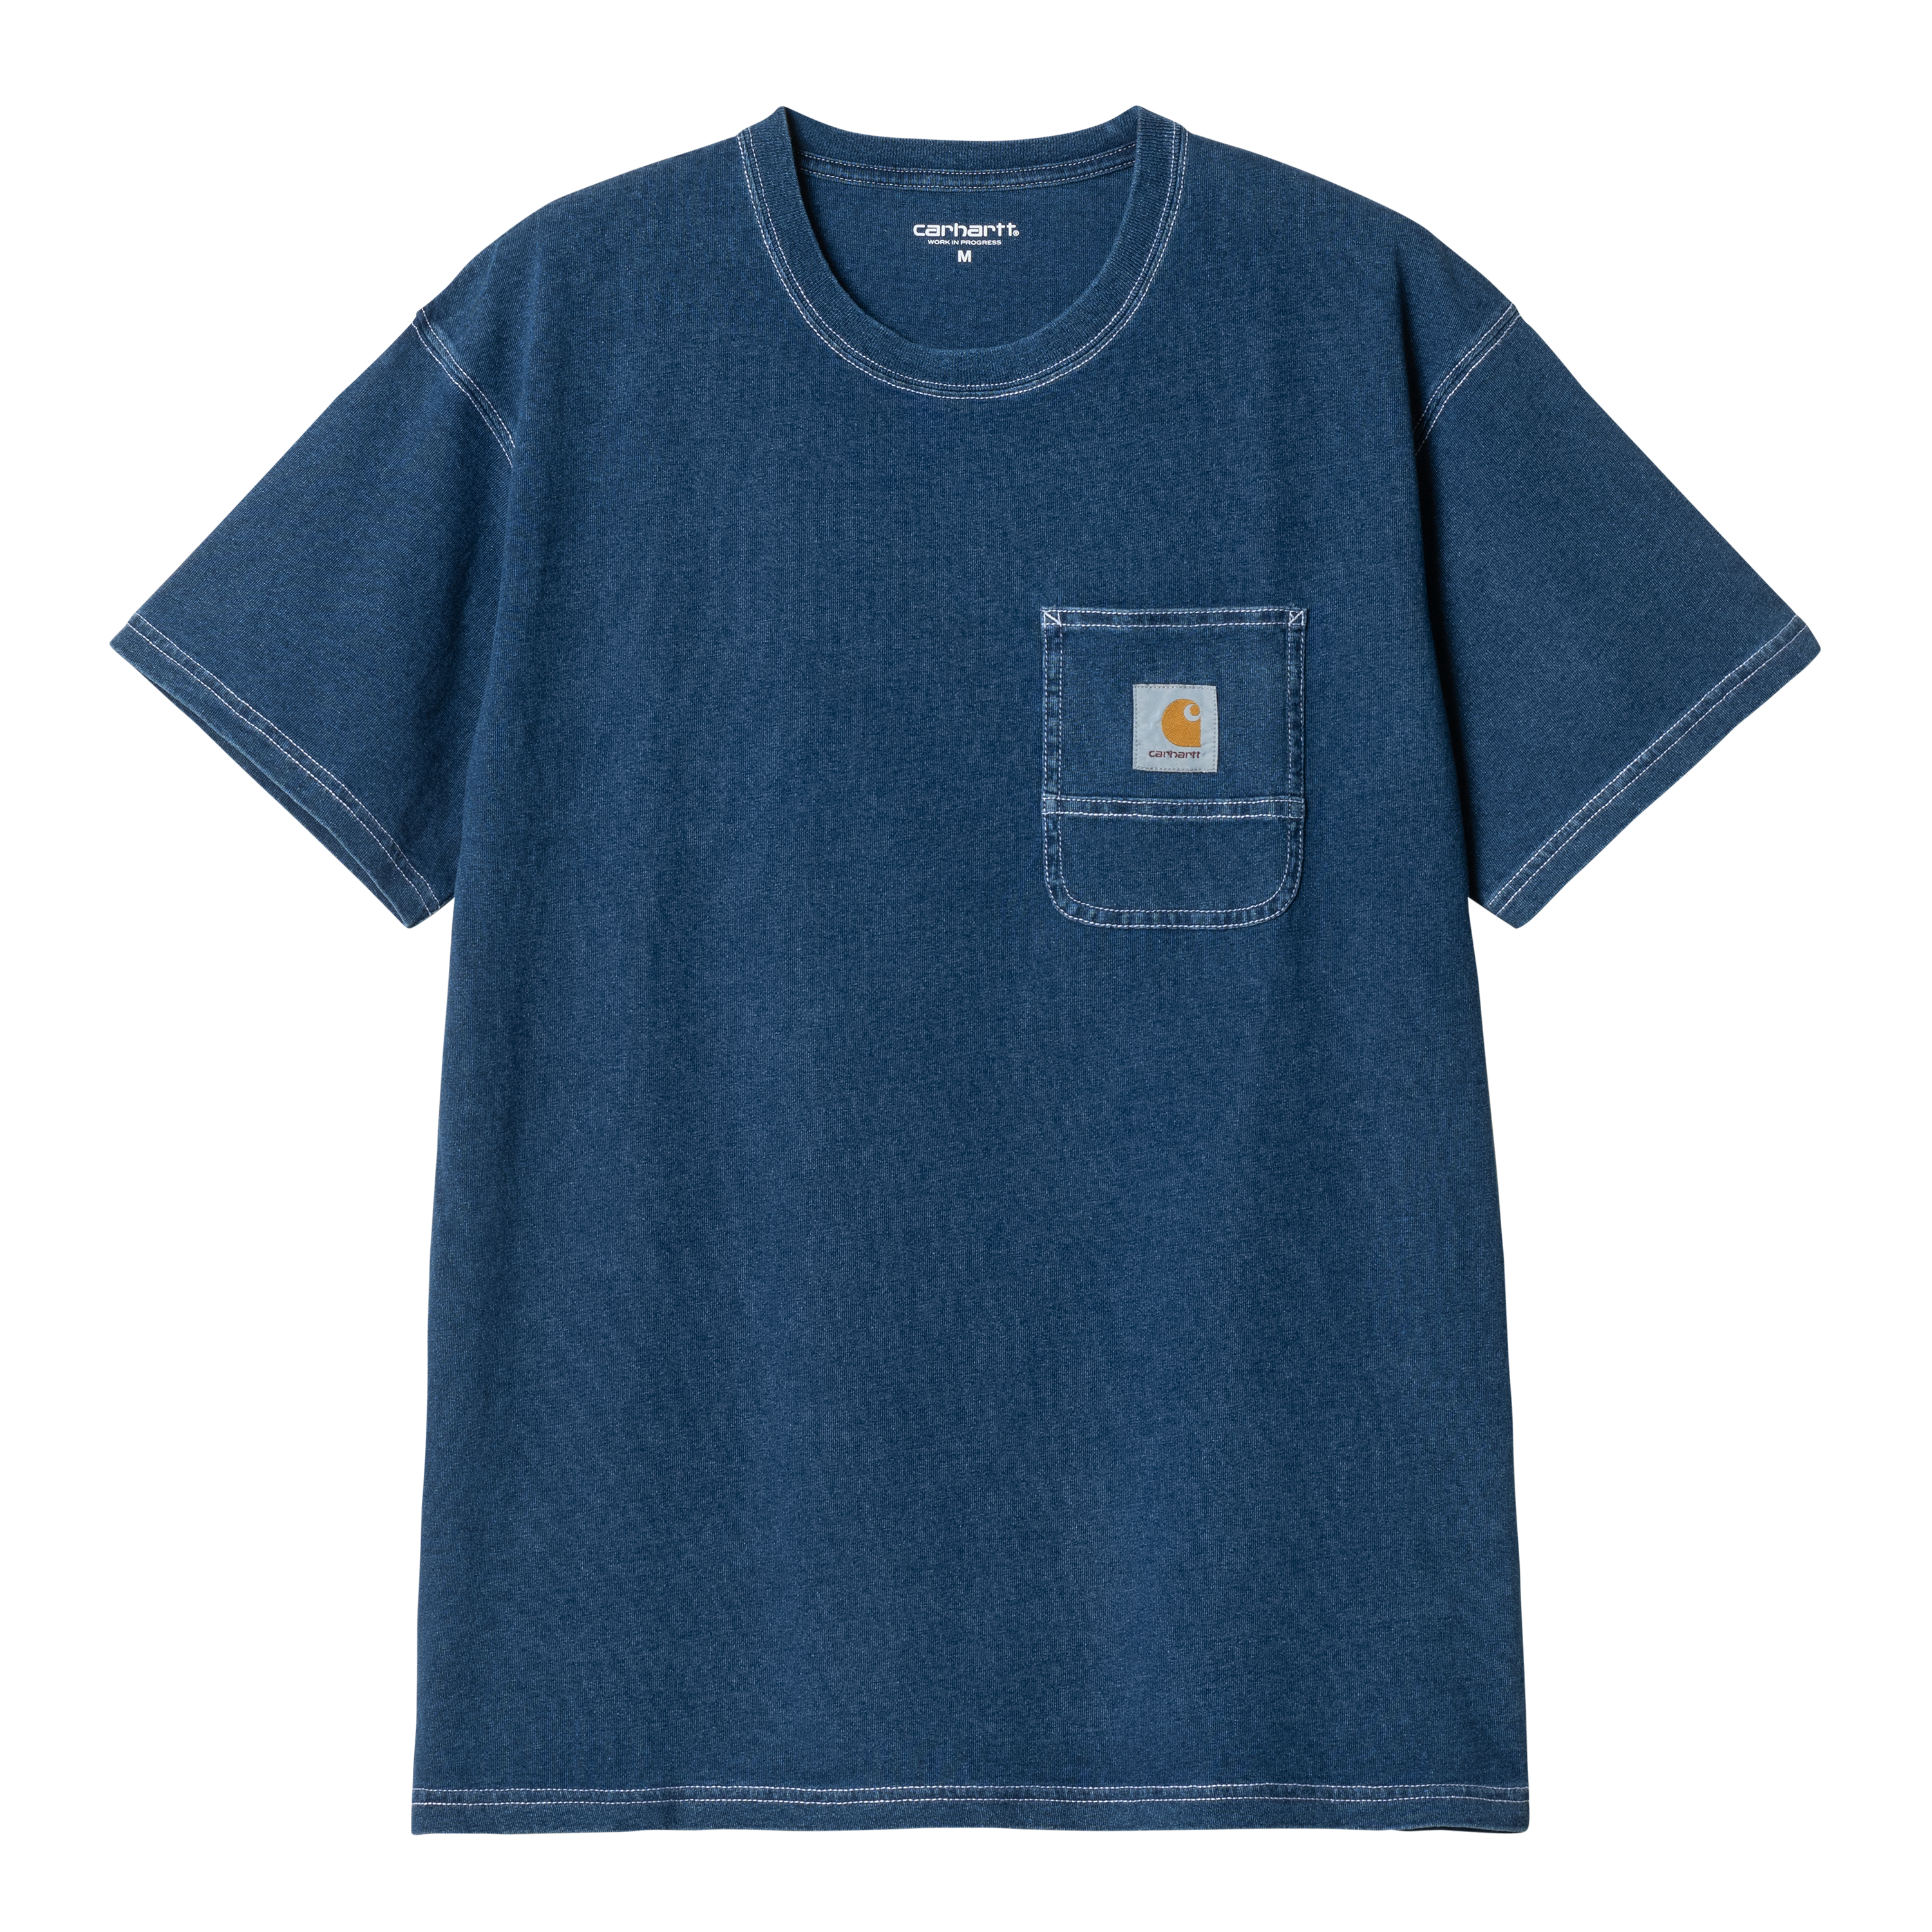 Carhartt Loose Fit Long Sleeve Graphic Tee for Men in Blue